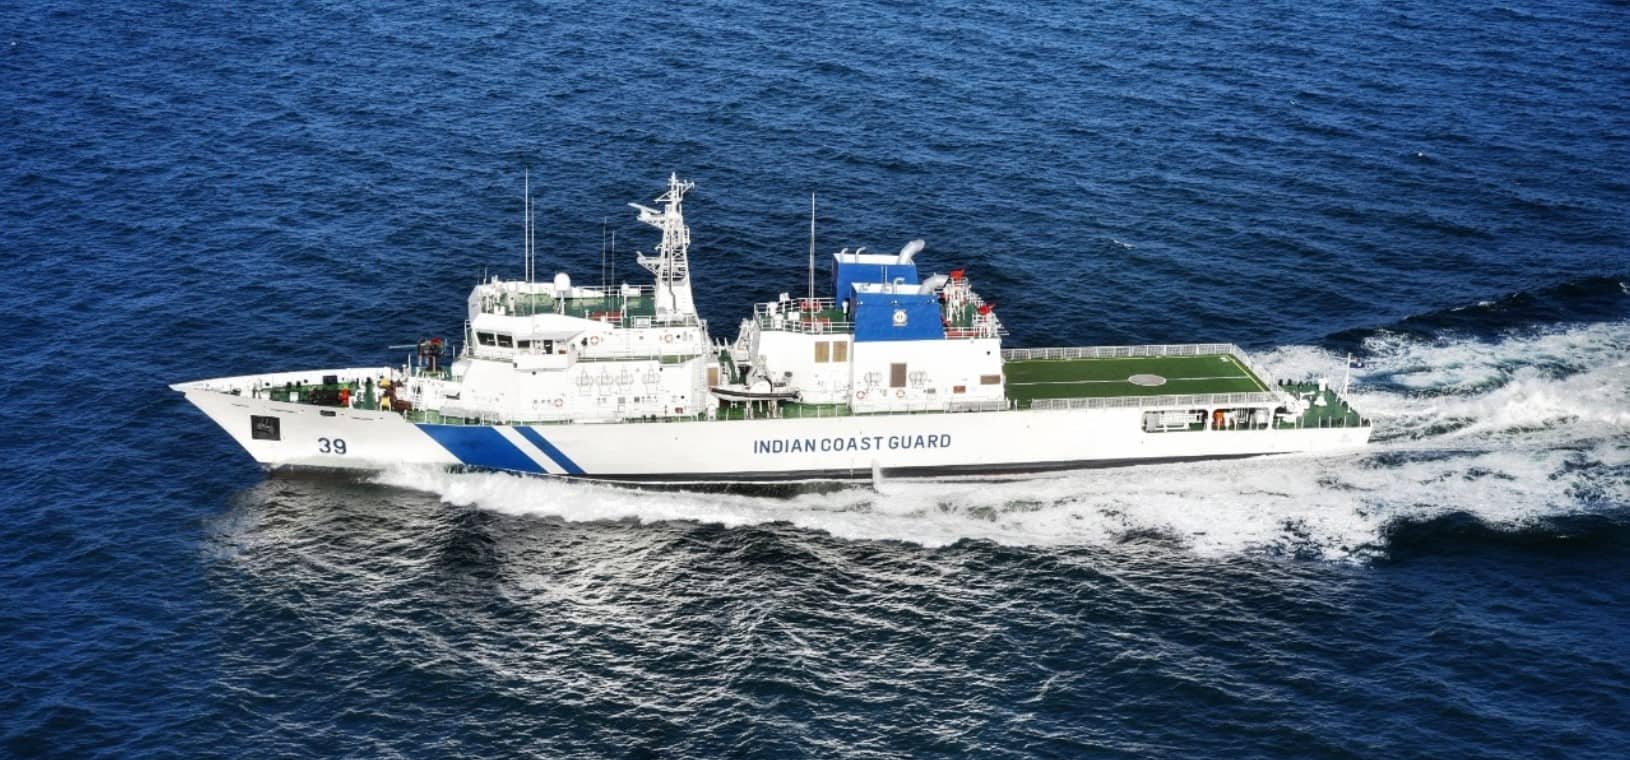 'Vigraha' ship has been commissioned into the Indian Coast Guard